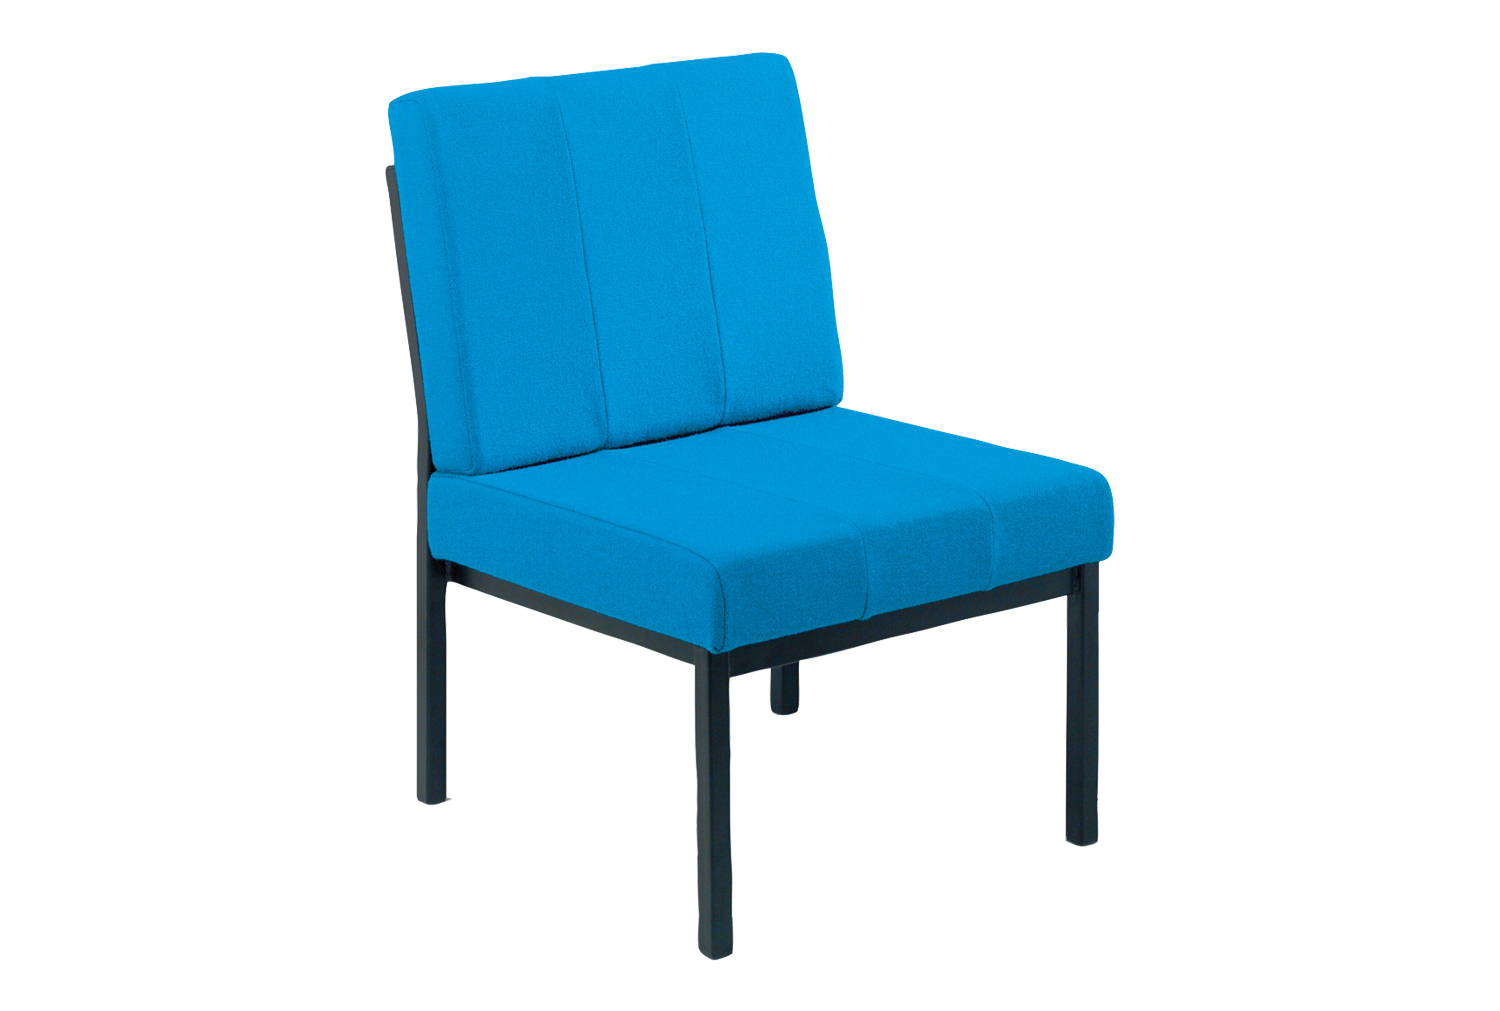 Qty 4 - Amstell 4 Leg Chair, Stage